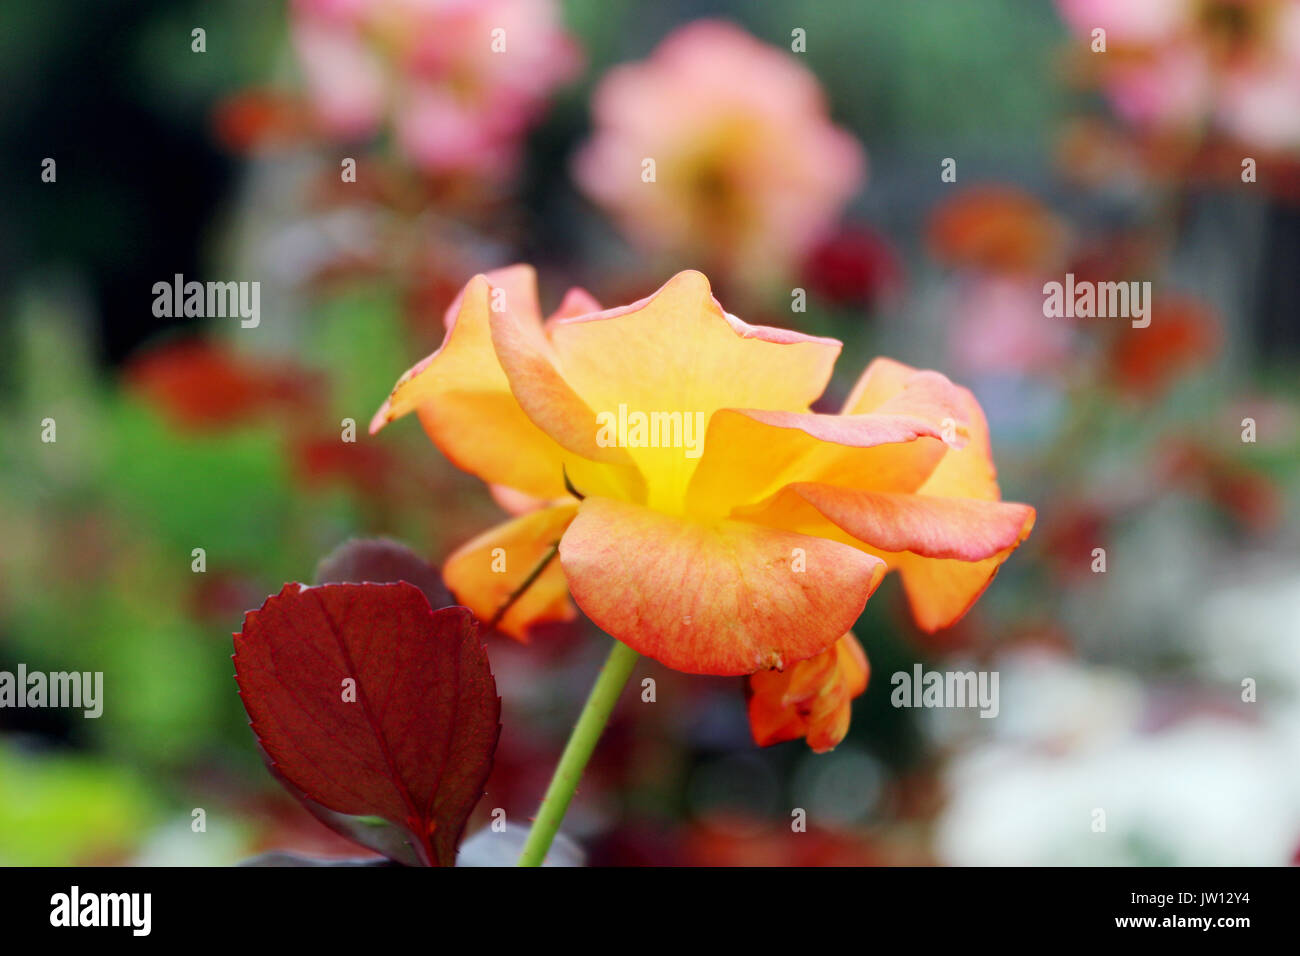 The side of a yellow and orange rose in a rose garden with a soft floral rose background. Stock Photo